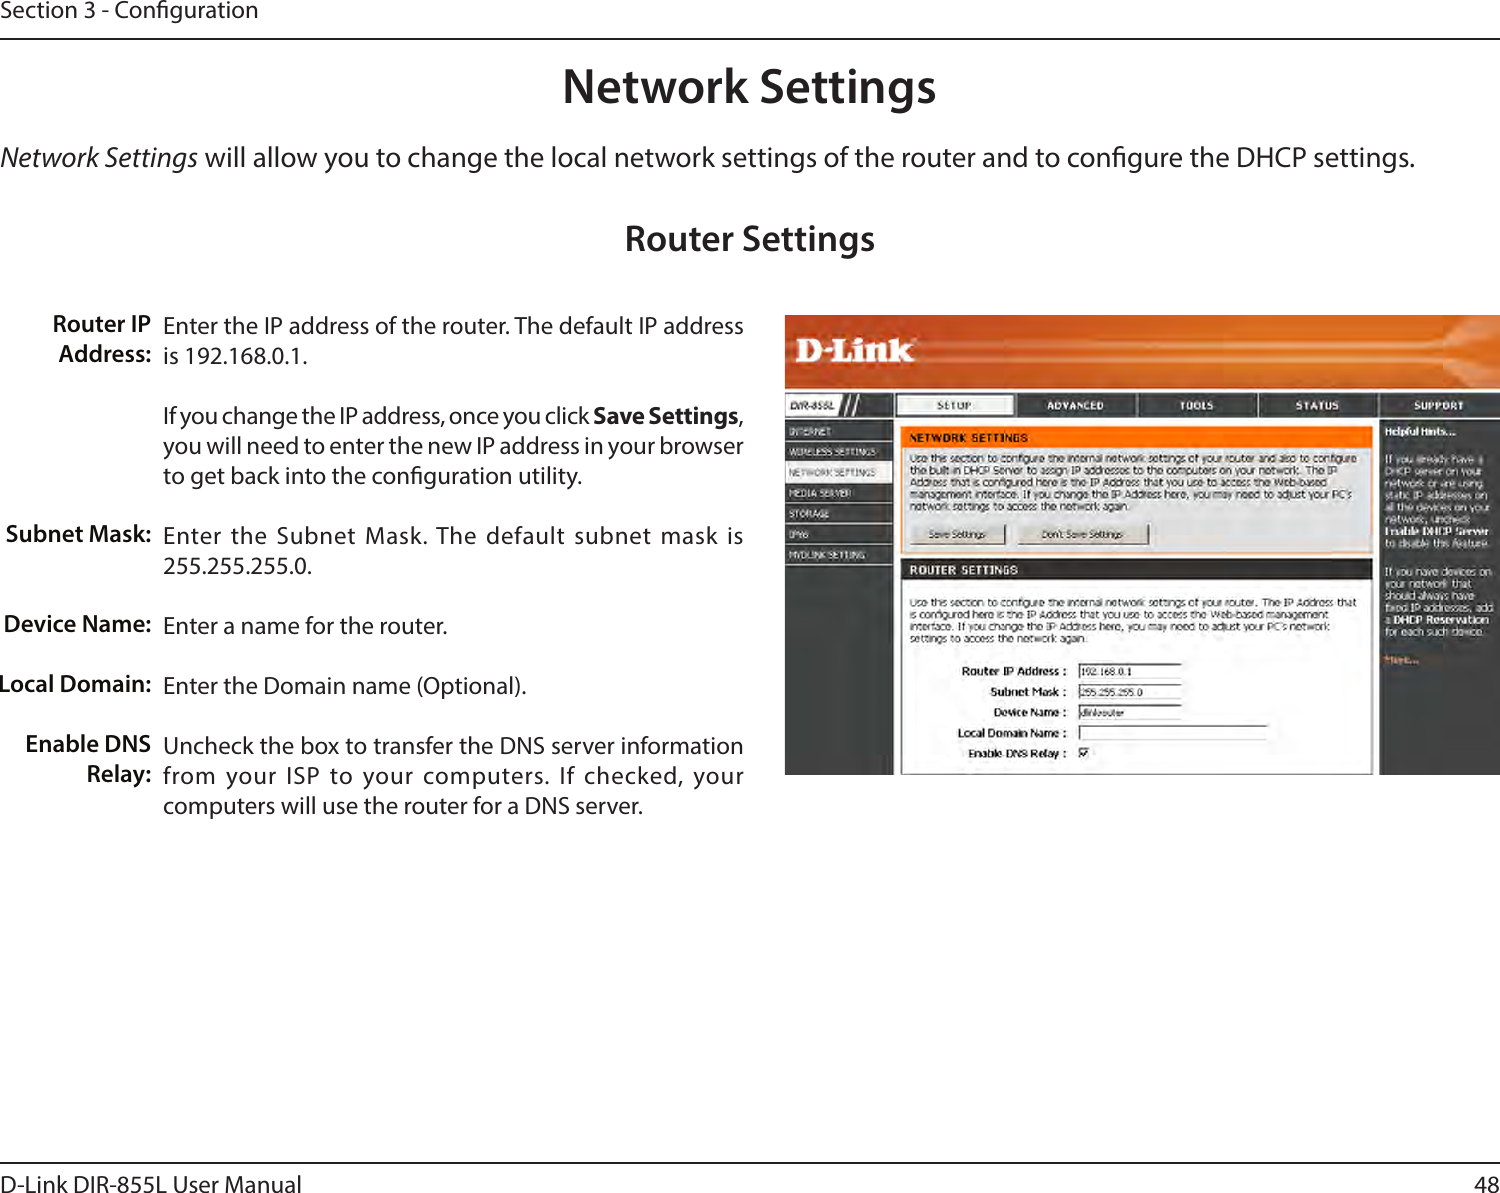 48D-Link DIR-855L User ManualSection 3 - CongurationNetwork Settings will allow you to change the local network settings of the router and to congure the DHCP settings.Network SettingsEnter the IP address of the router. The default IP address is 192.168.0.1.If you change the IP address, once you click Save Settings, you will need to enter the new IP address in your browser to get back into the conguration utility.Enter the Subnet Mask. The default subnet mask is 255.255.255.0.Enter a name for the router.Enter the Domain name (Optional).Uncheck the box to transfer the DNS server information from your ISP to your computers. If checked, your computers will use the router for a DNS server.Router IP Address:Subnet Mask:Device Name:Local Domain:Enable DNS Relay:Router Settings